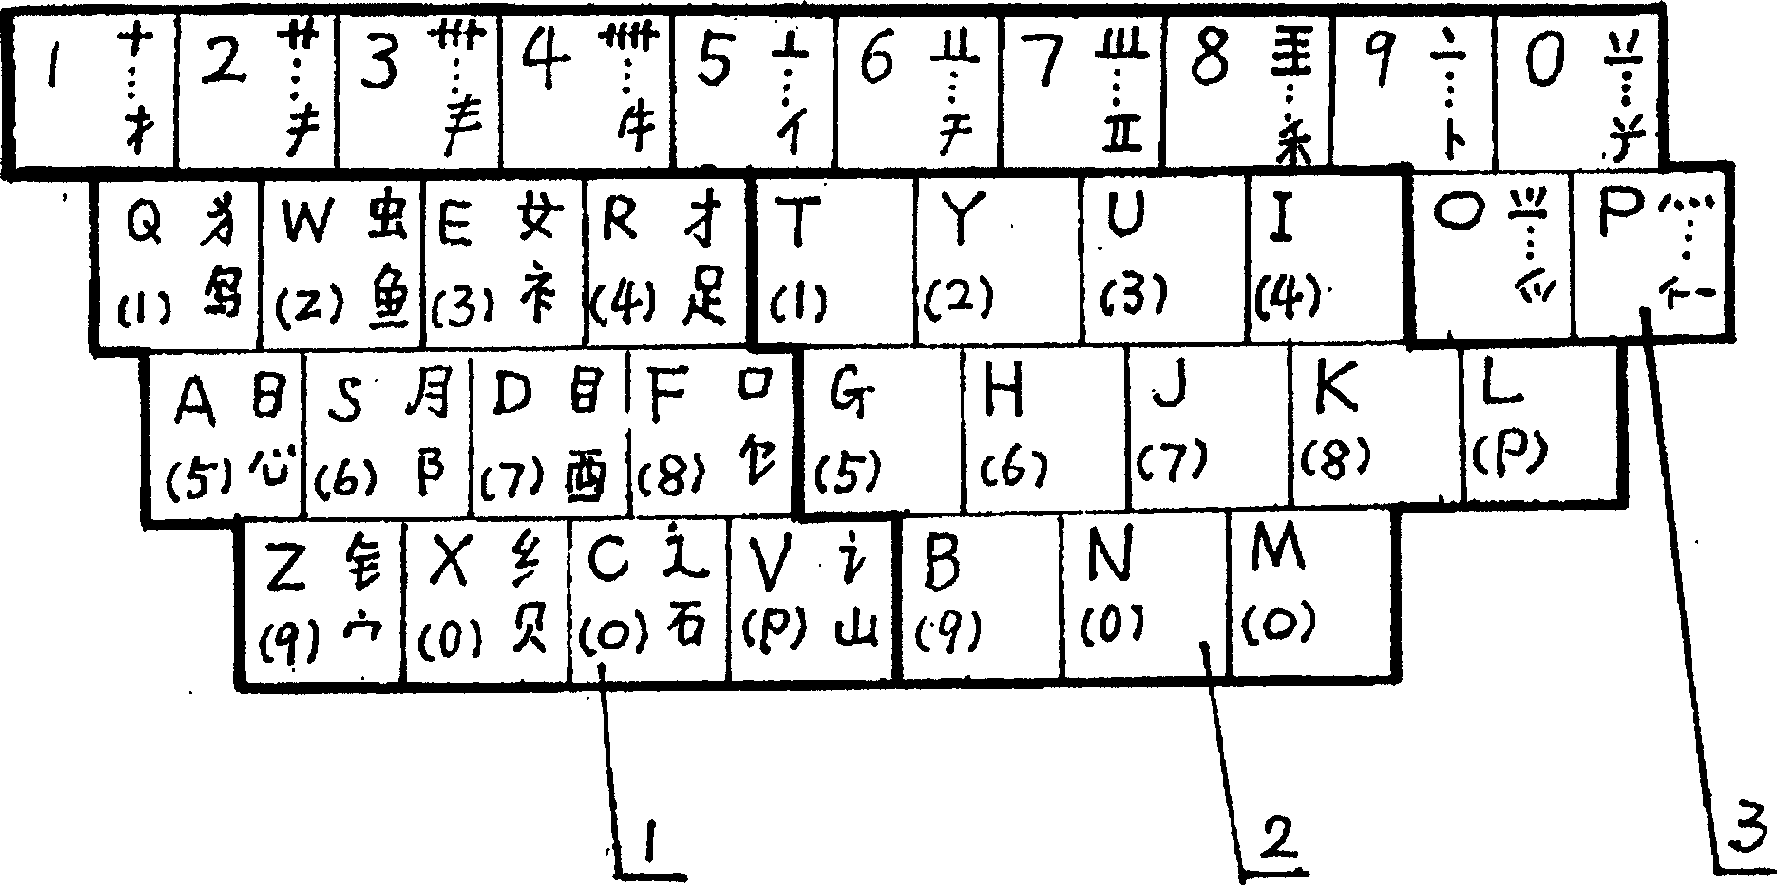 Complementary encoding method for Chinese character input